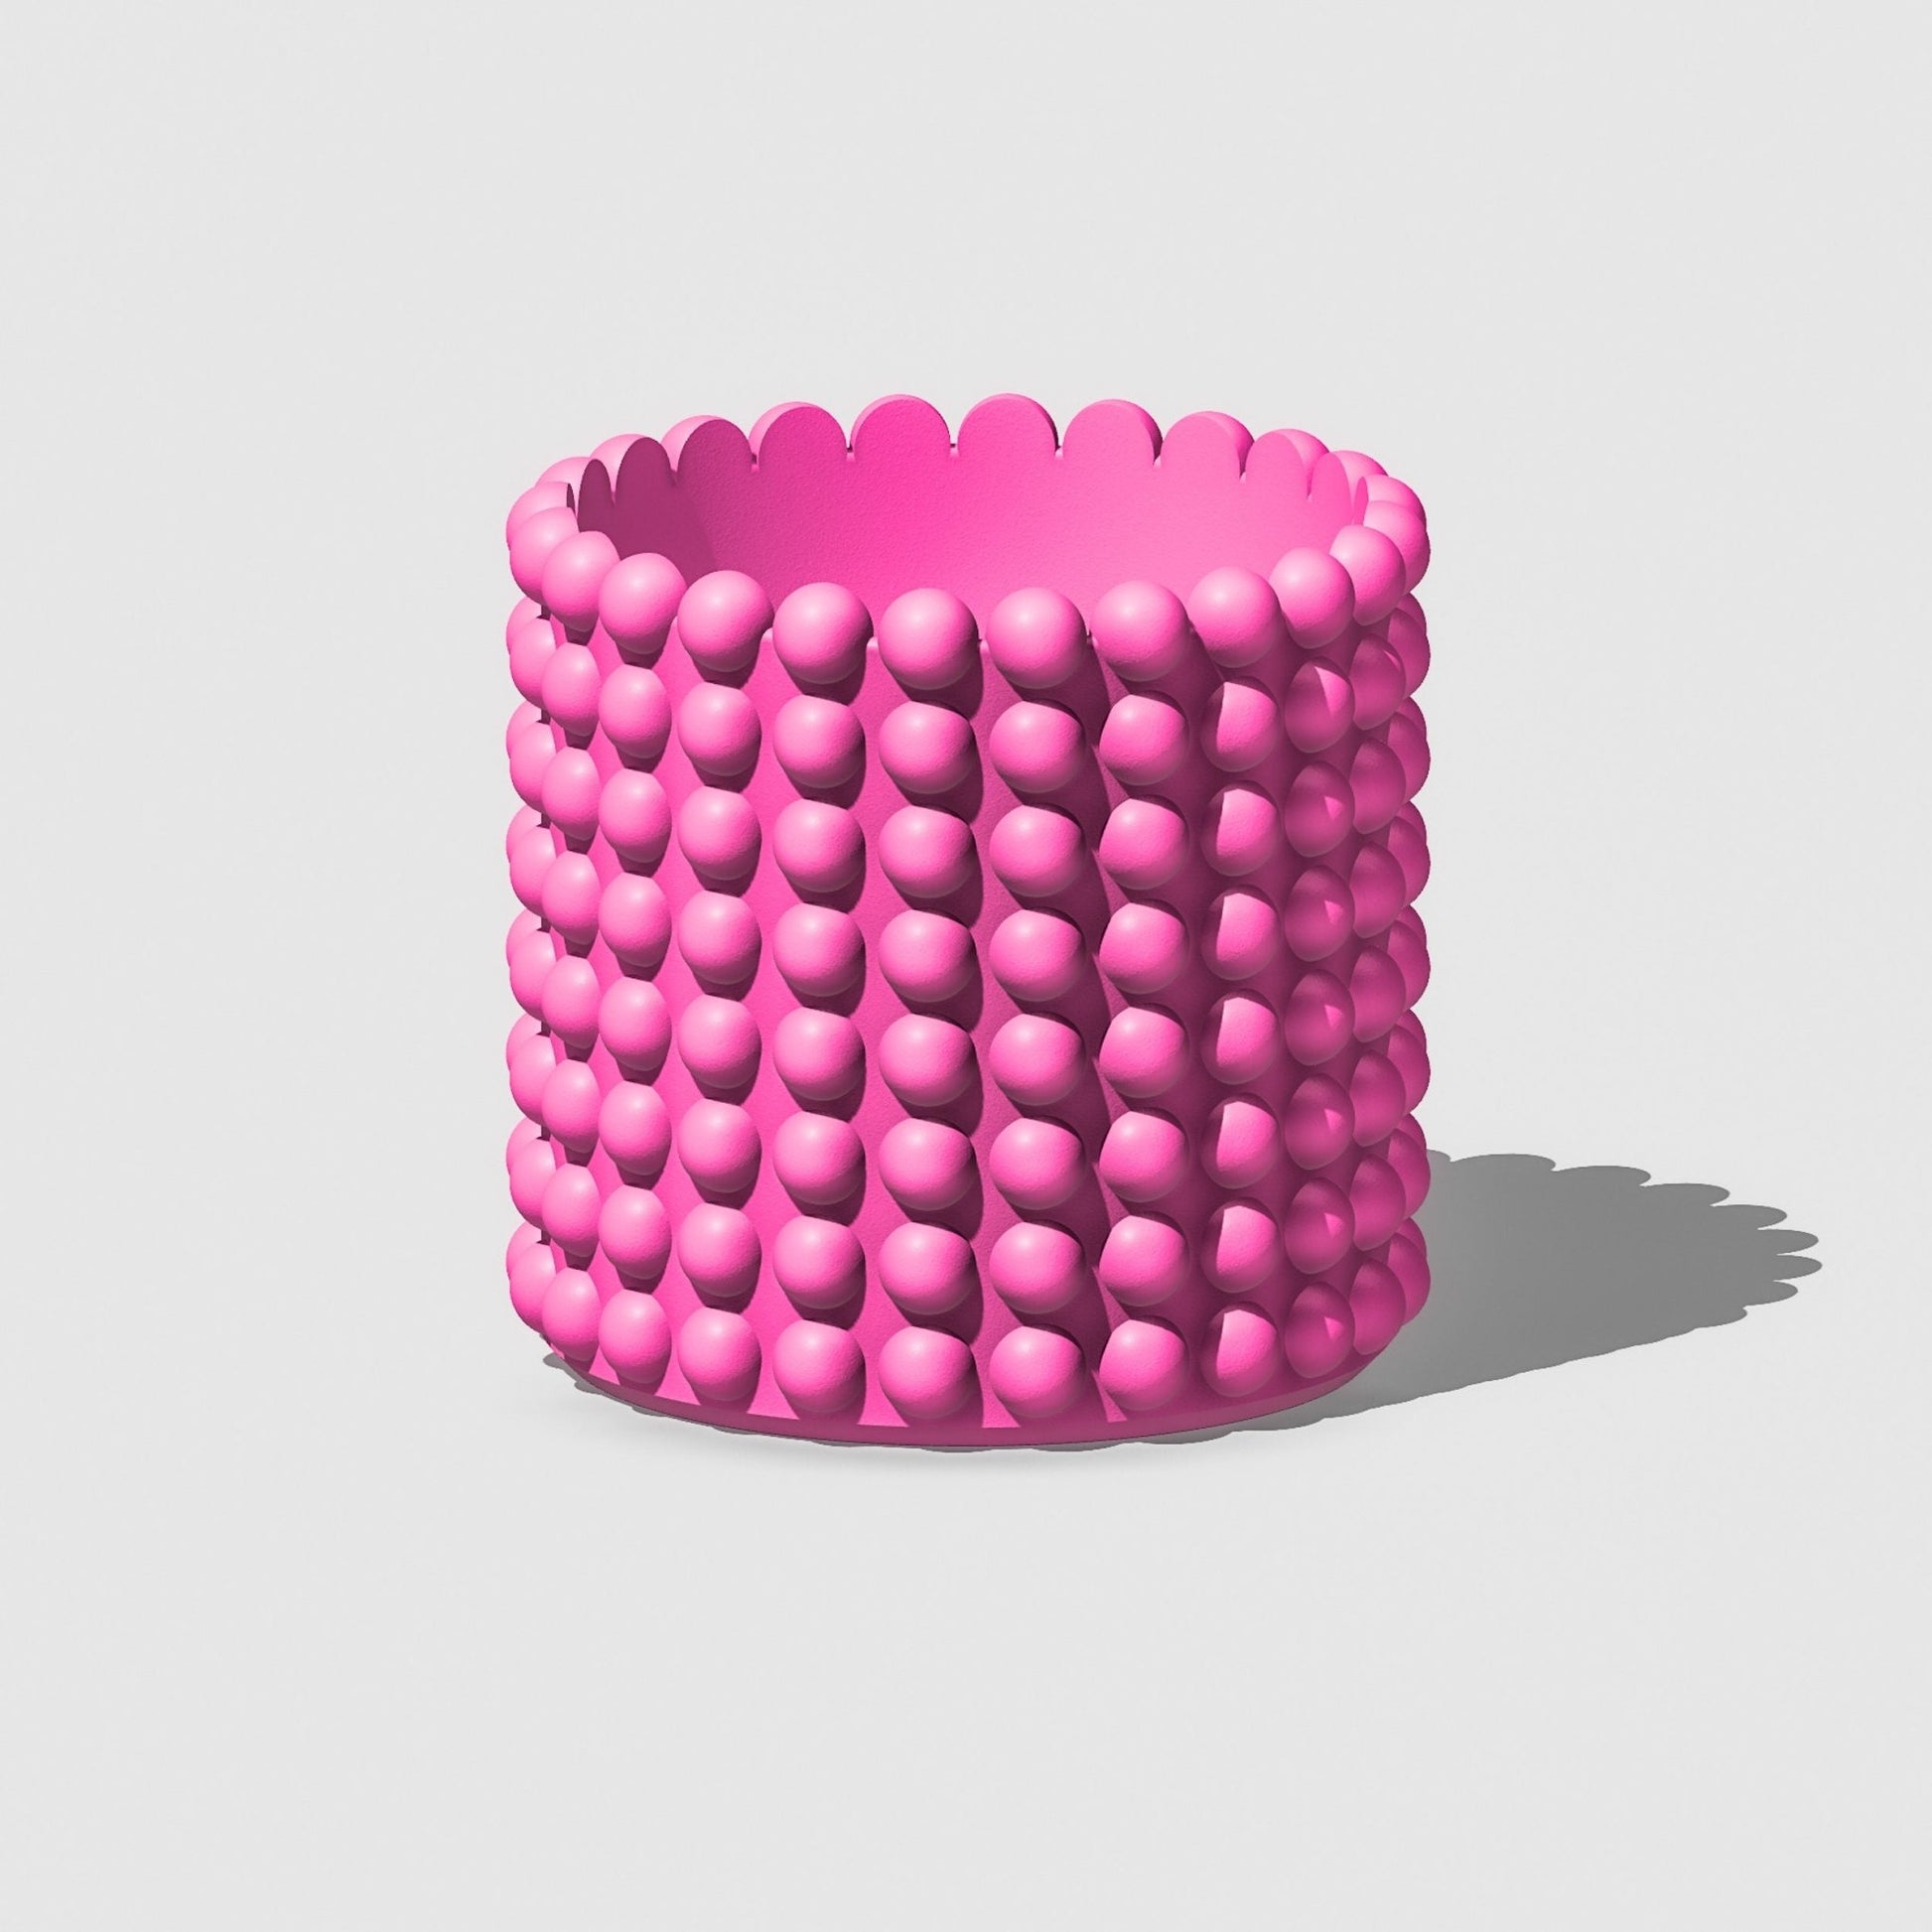 Pink Modern planter with drainage 'RING OF PEARLS DESIGN' - Rosebud HomeGoods Pink 4 Inch - No Tray MODERN HOME GOOD